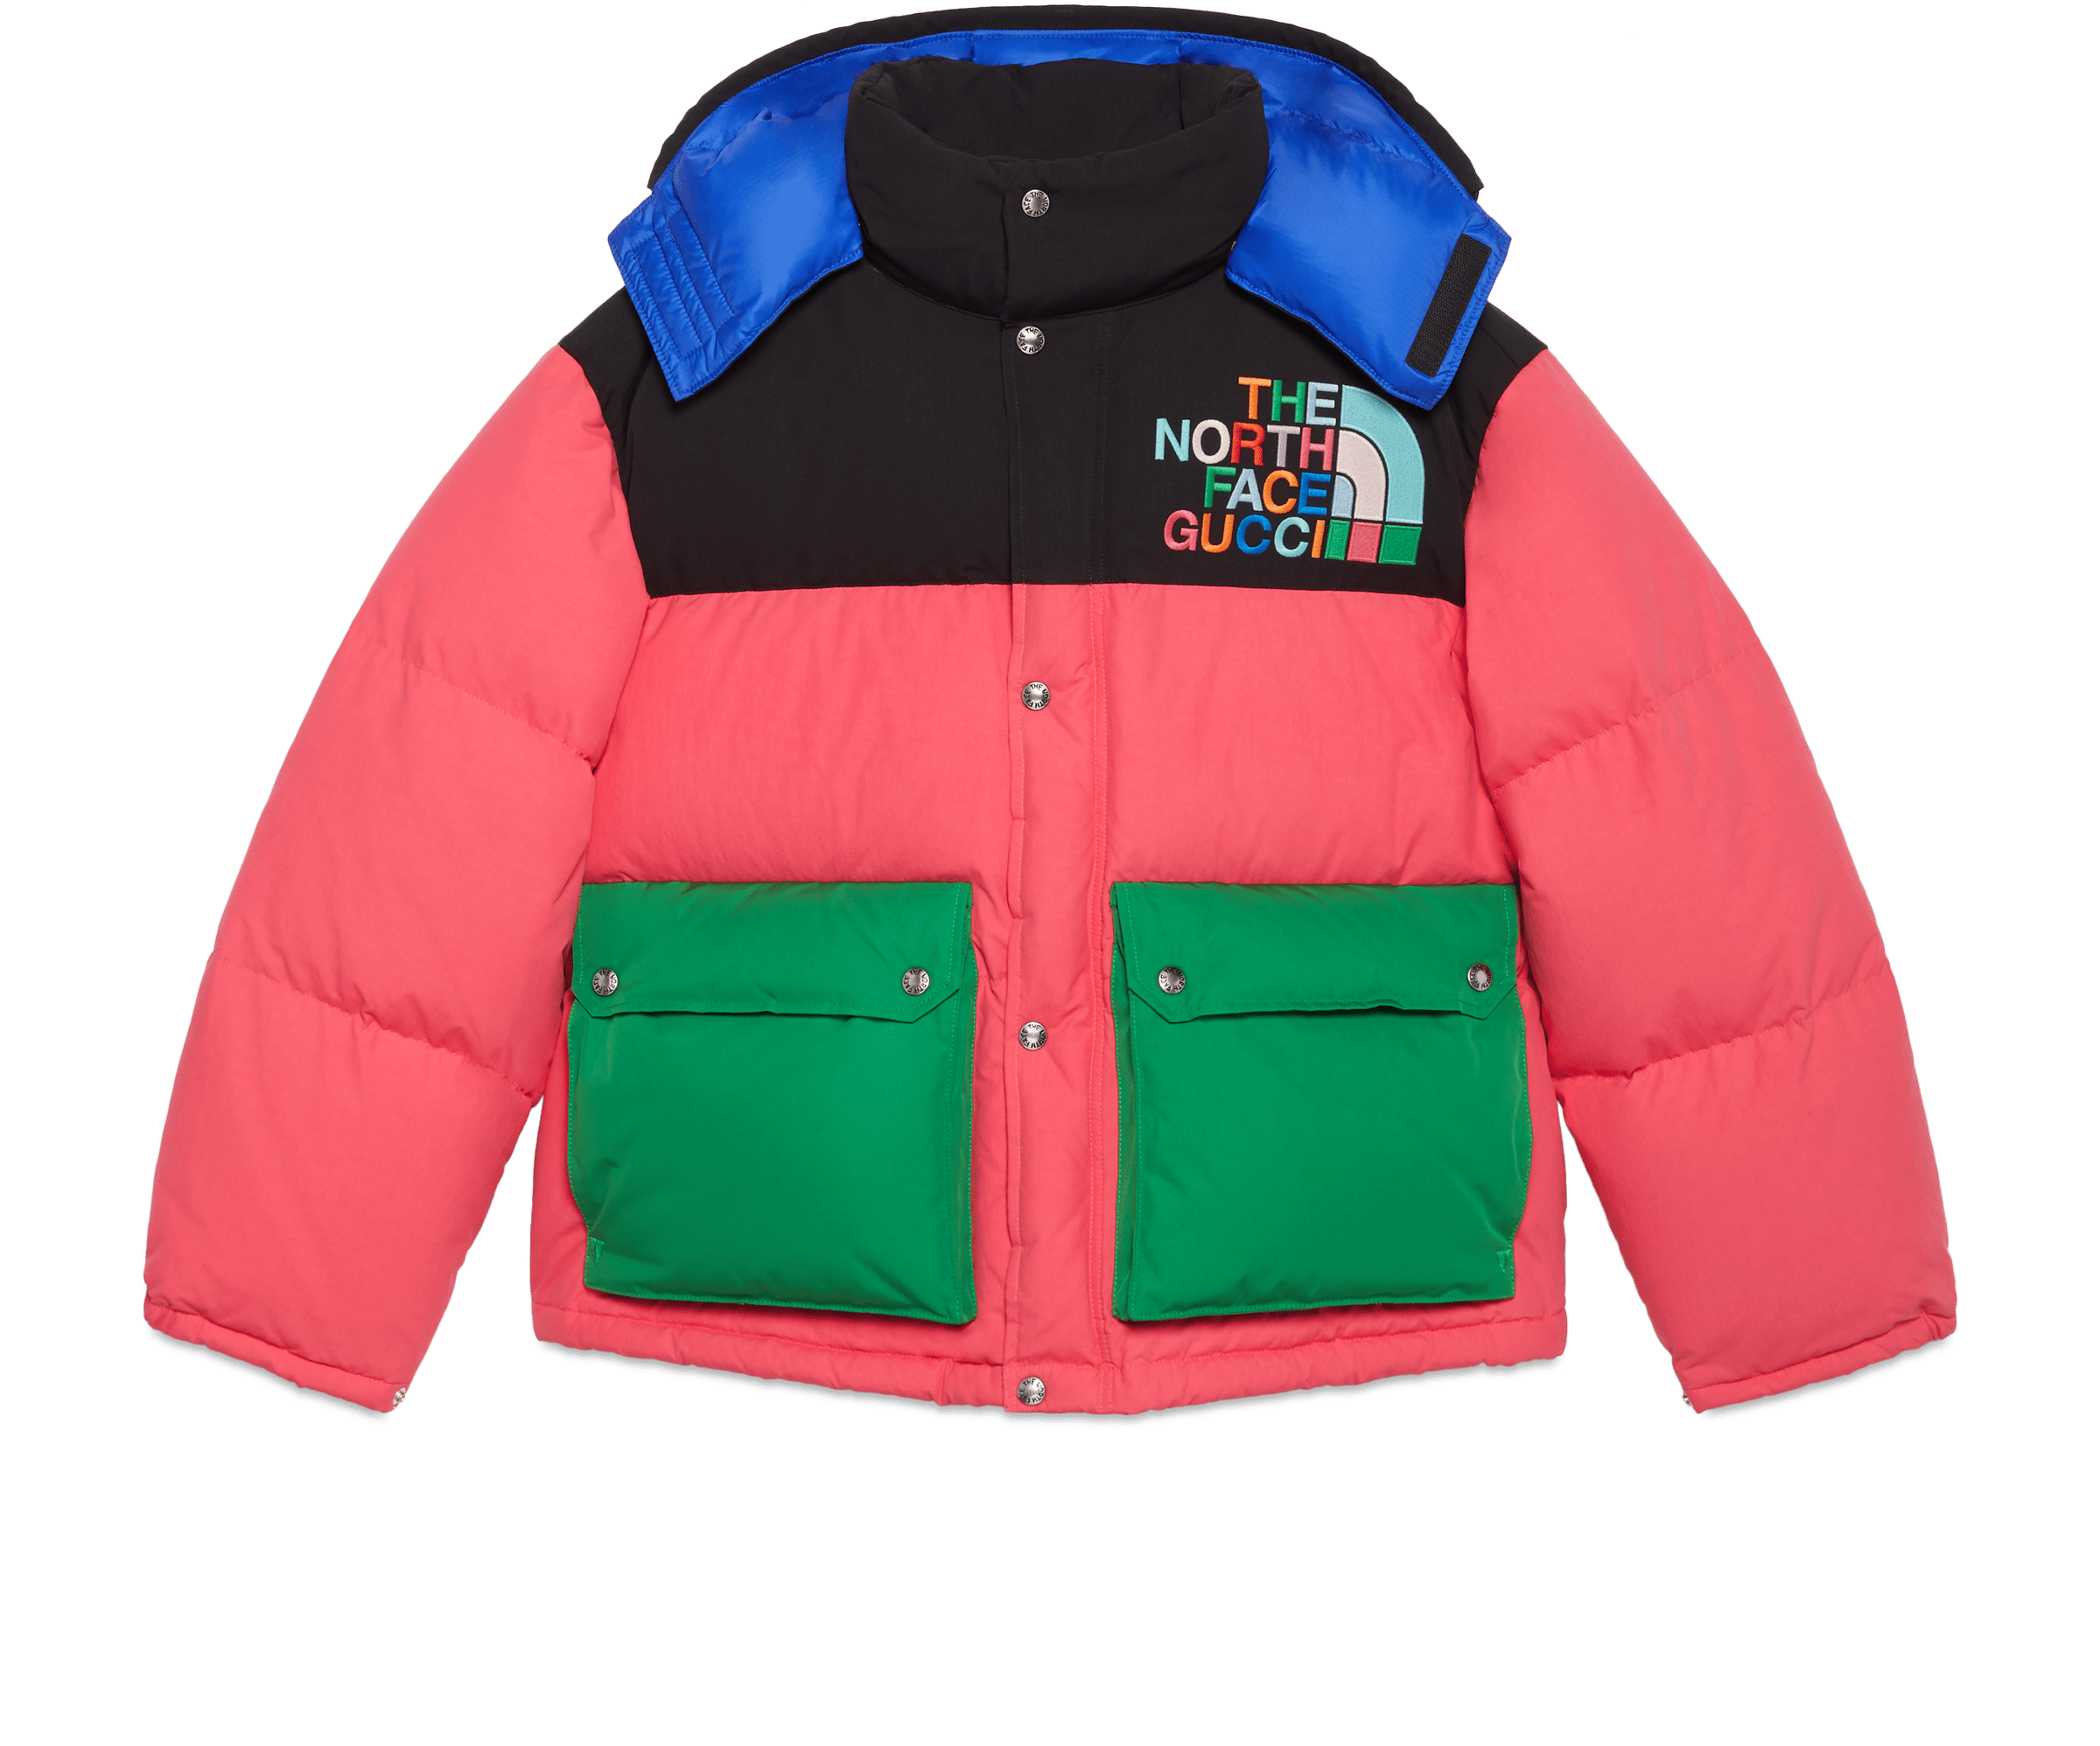 The North Face and Gucci Launch Chapter 3 of Ongoing Collaboration